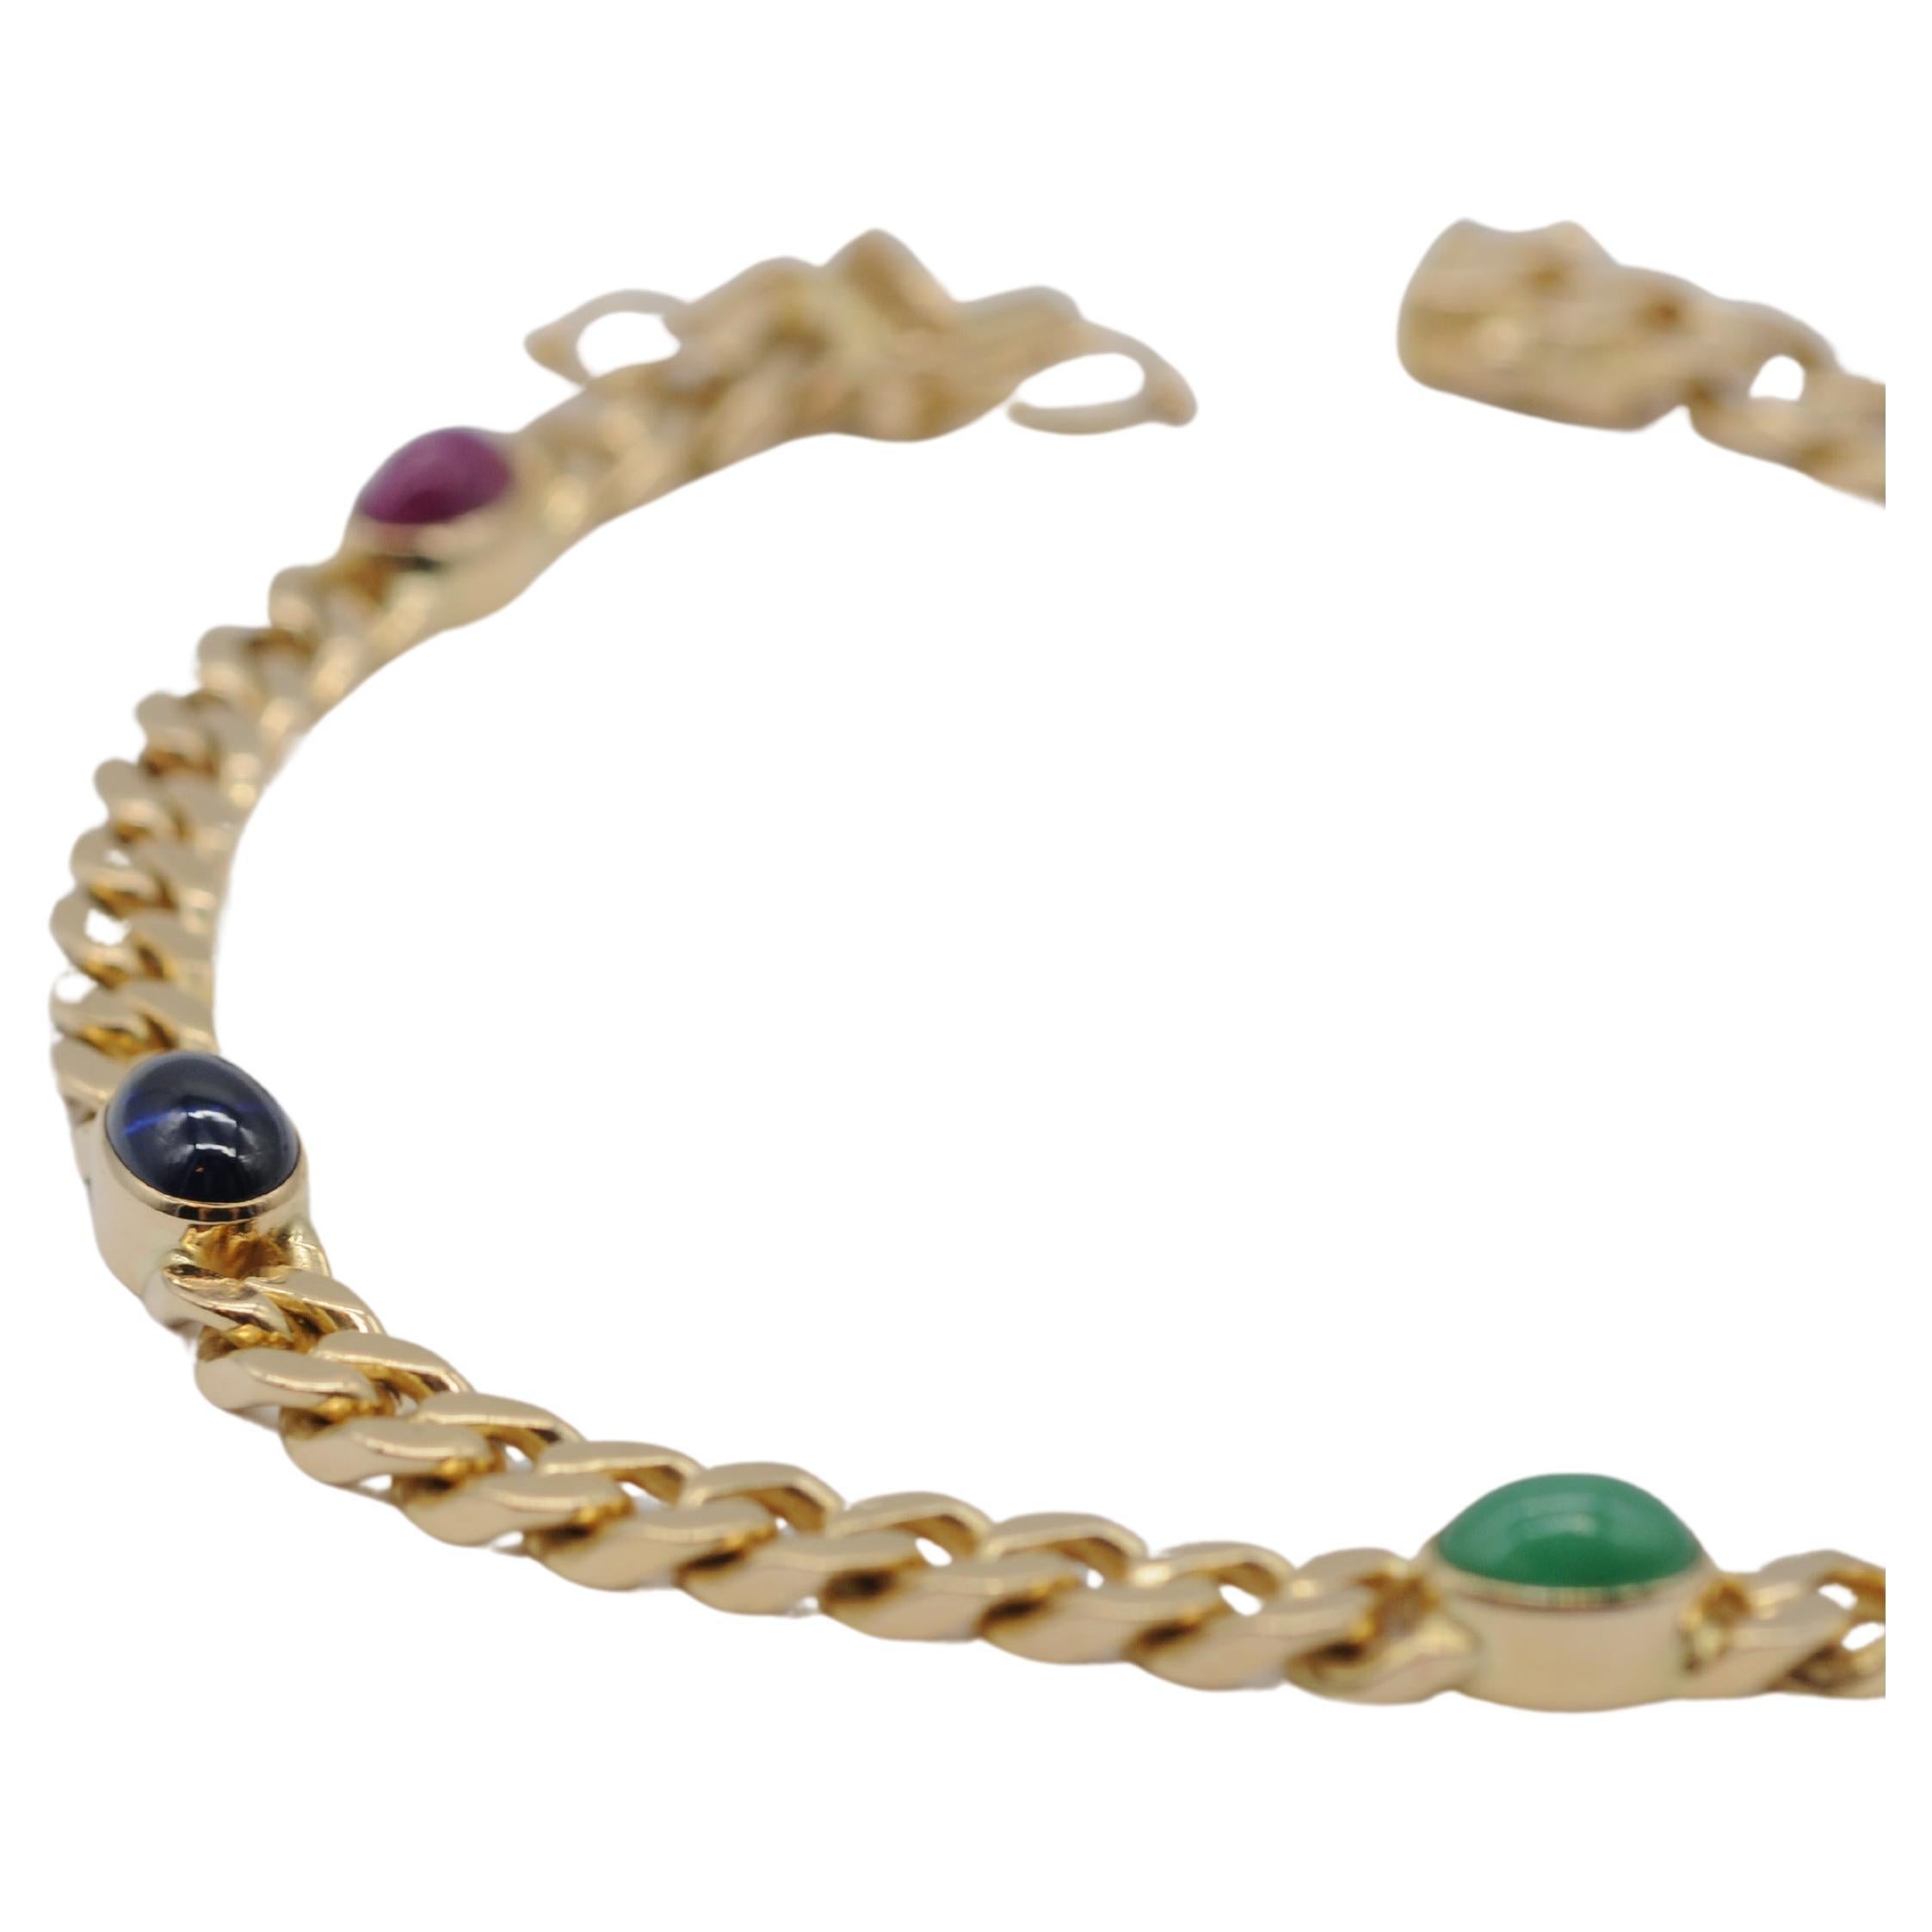 Aesthetic Movement Noble 14k yellow gold bracelet with cabochon For Sale